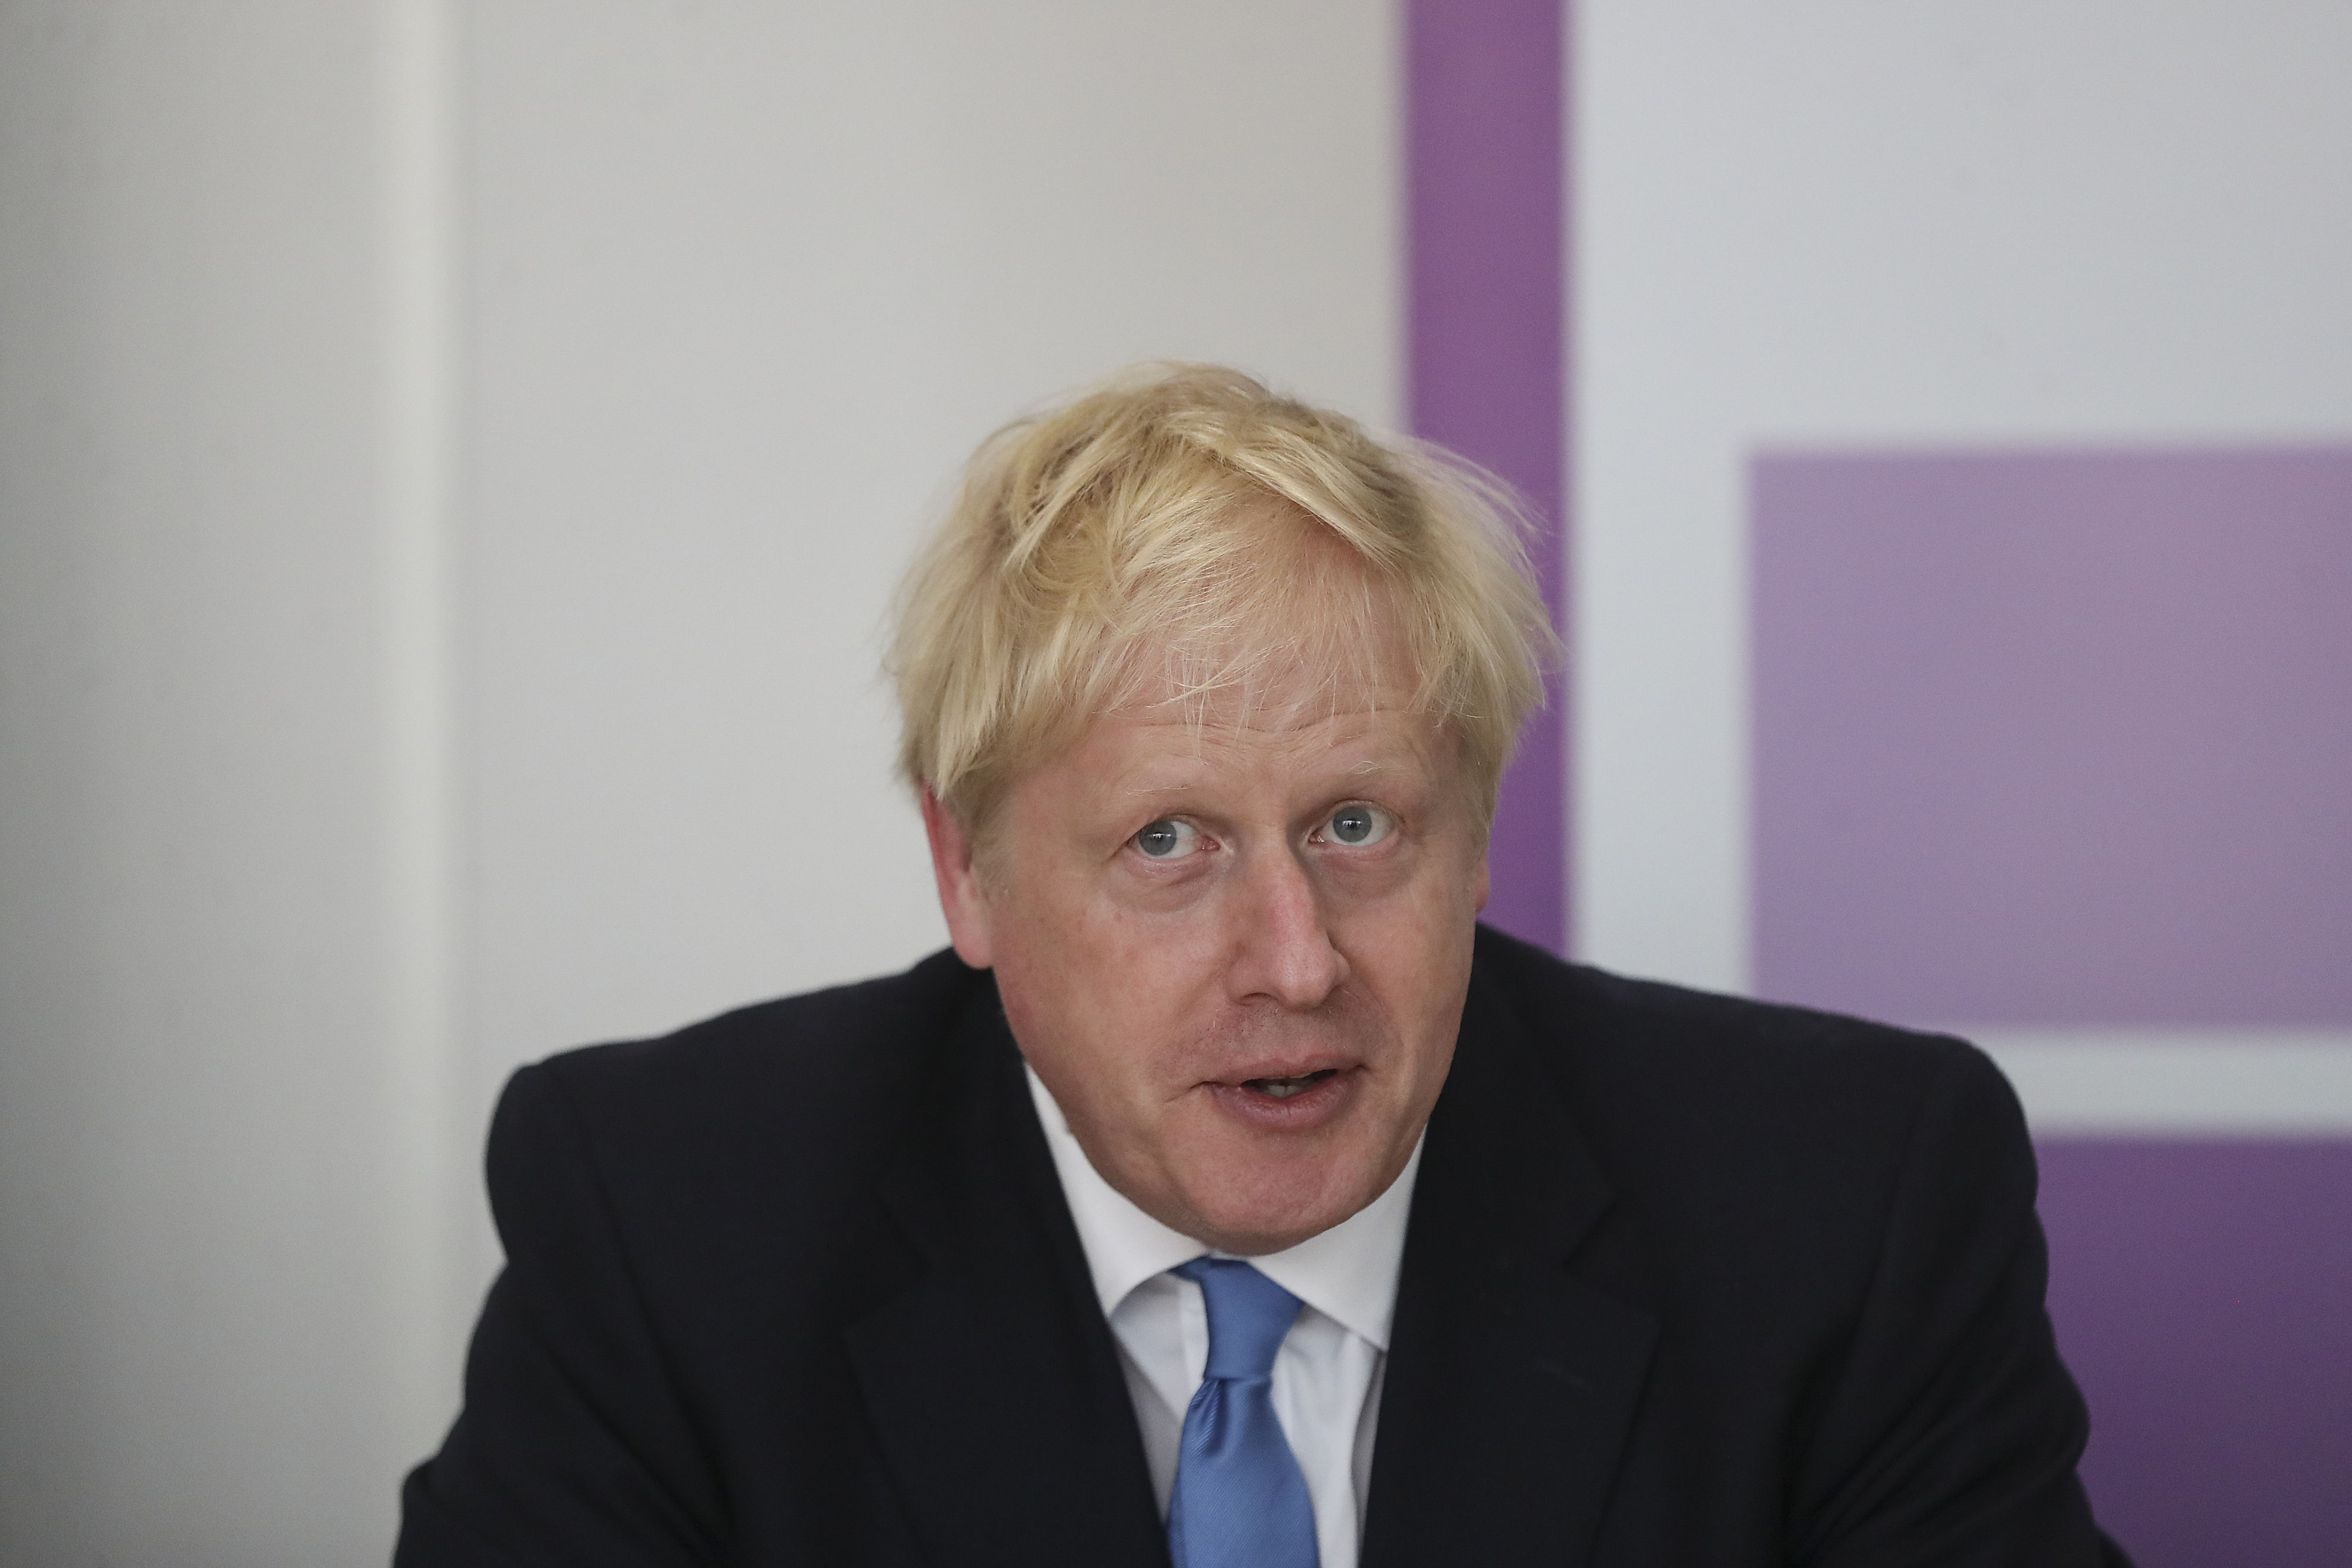 Farming groups have called on Boris Johnson's government to release what measures there are to deal with no-deal consequences